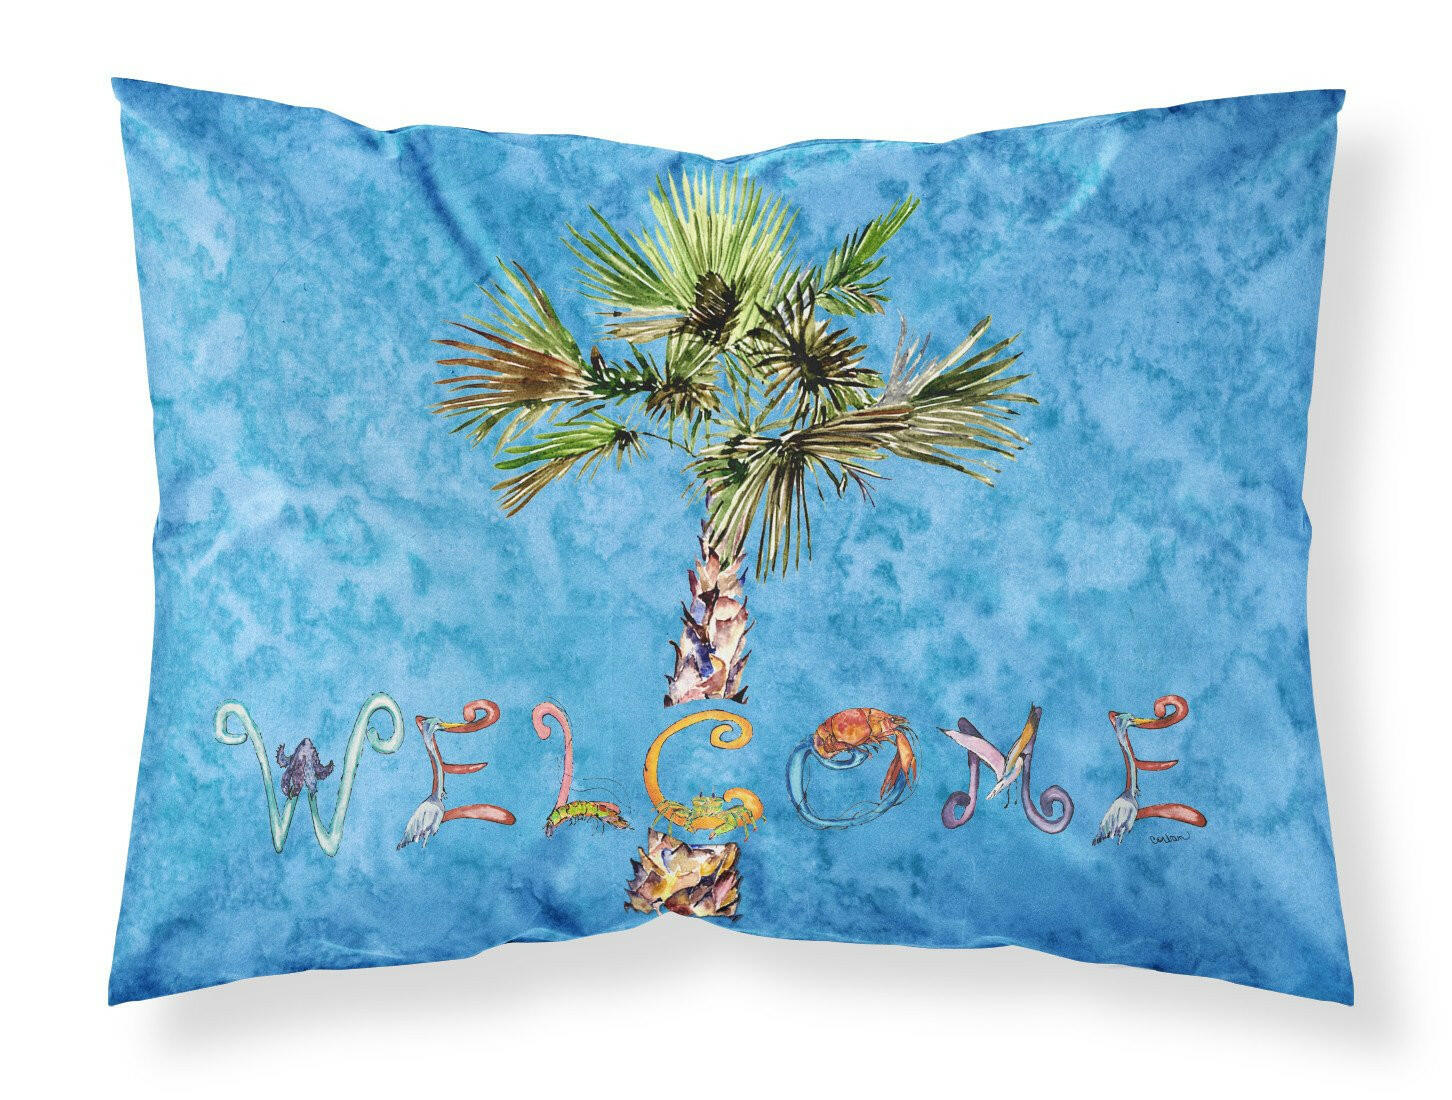 Welcome Palm Tree on Blue Fabric Standard Pillowcase 8708PILLOWCASE by Caroline's Treasures